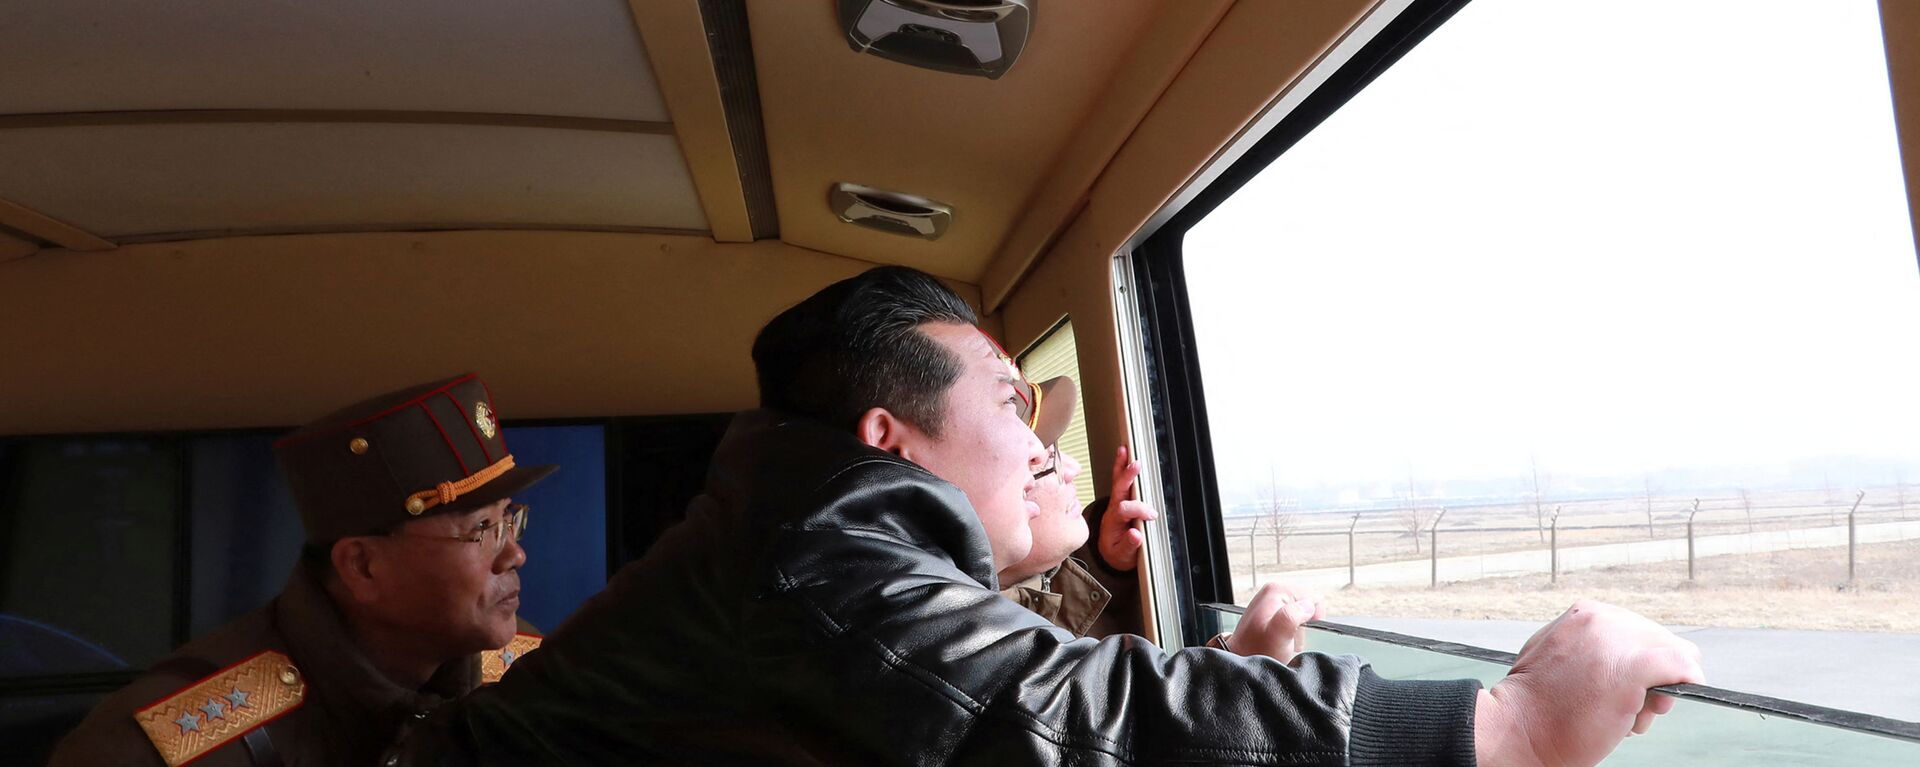 North Korean leader Kim Jong Un looks through a window during the test firing of what state media report is a new type of intercontinental ballistic missile (ICBM) in this undated photo released on March 24, 2022 by North Korea's Korean Central News Agency (KCNA). - Sputnik International, 1920, 17.04.2022